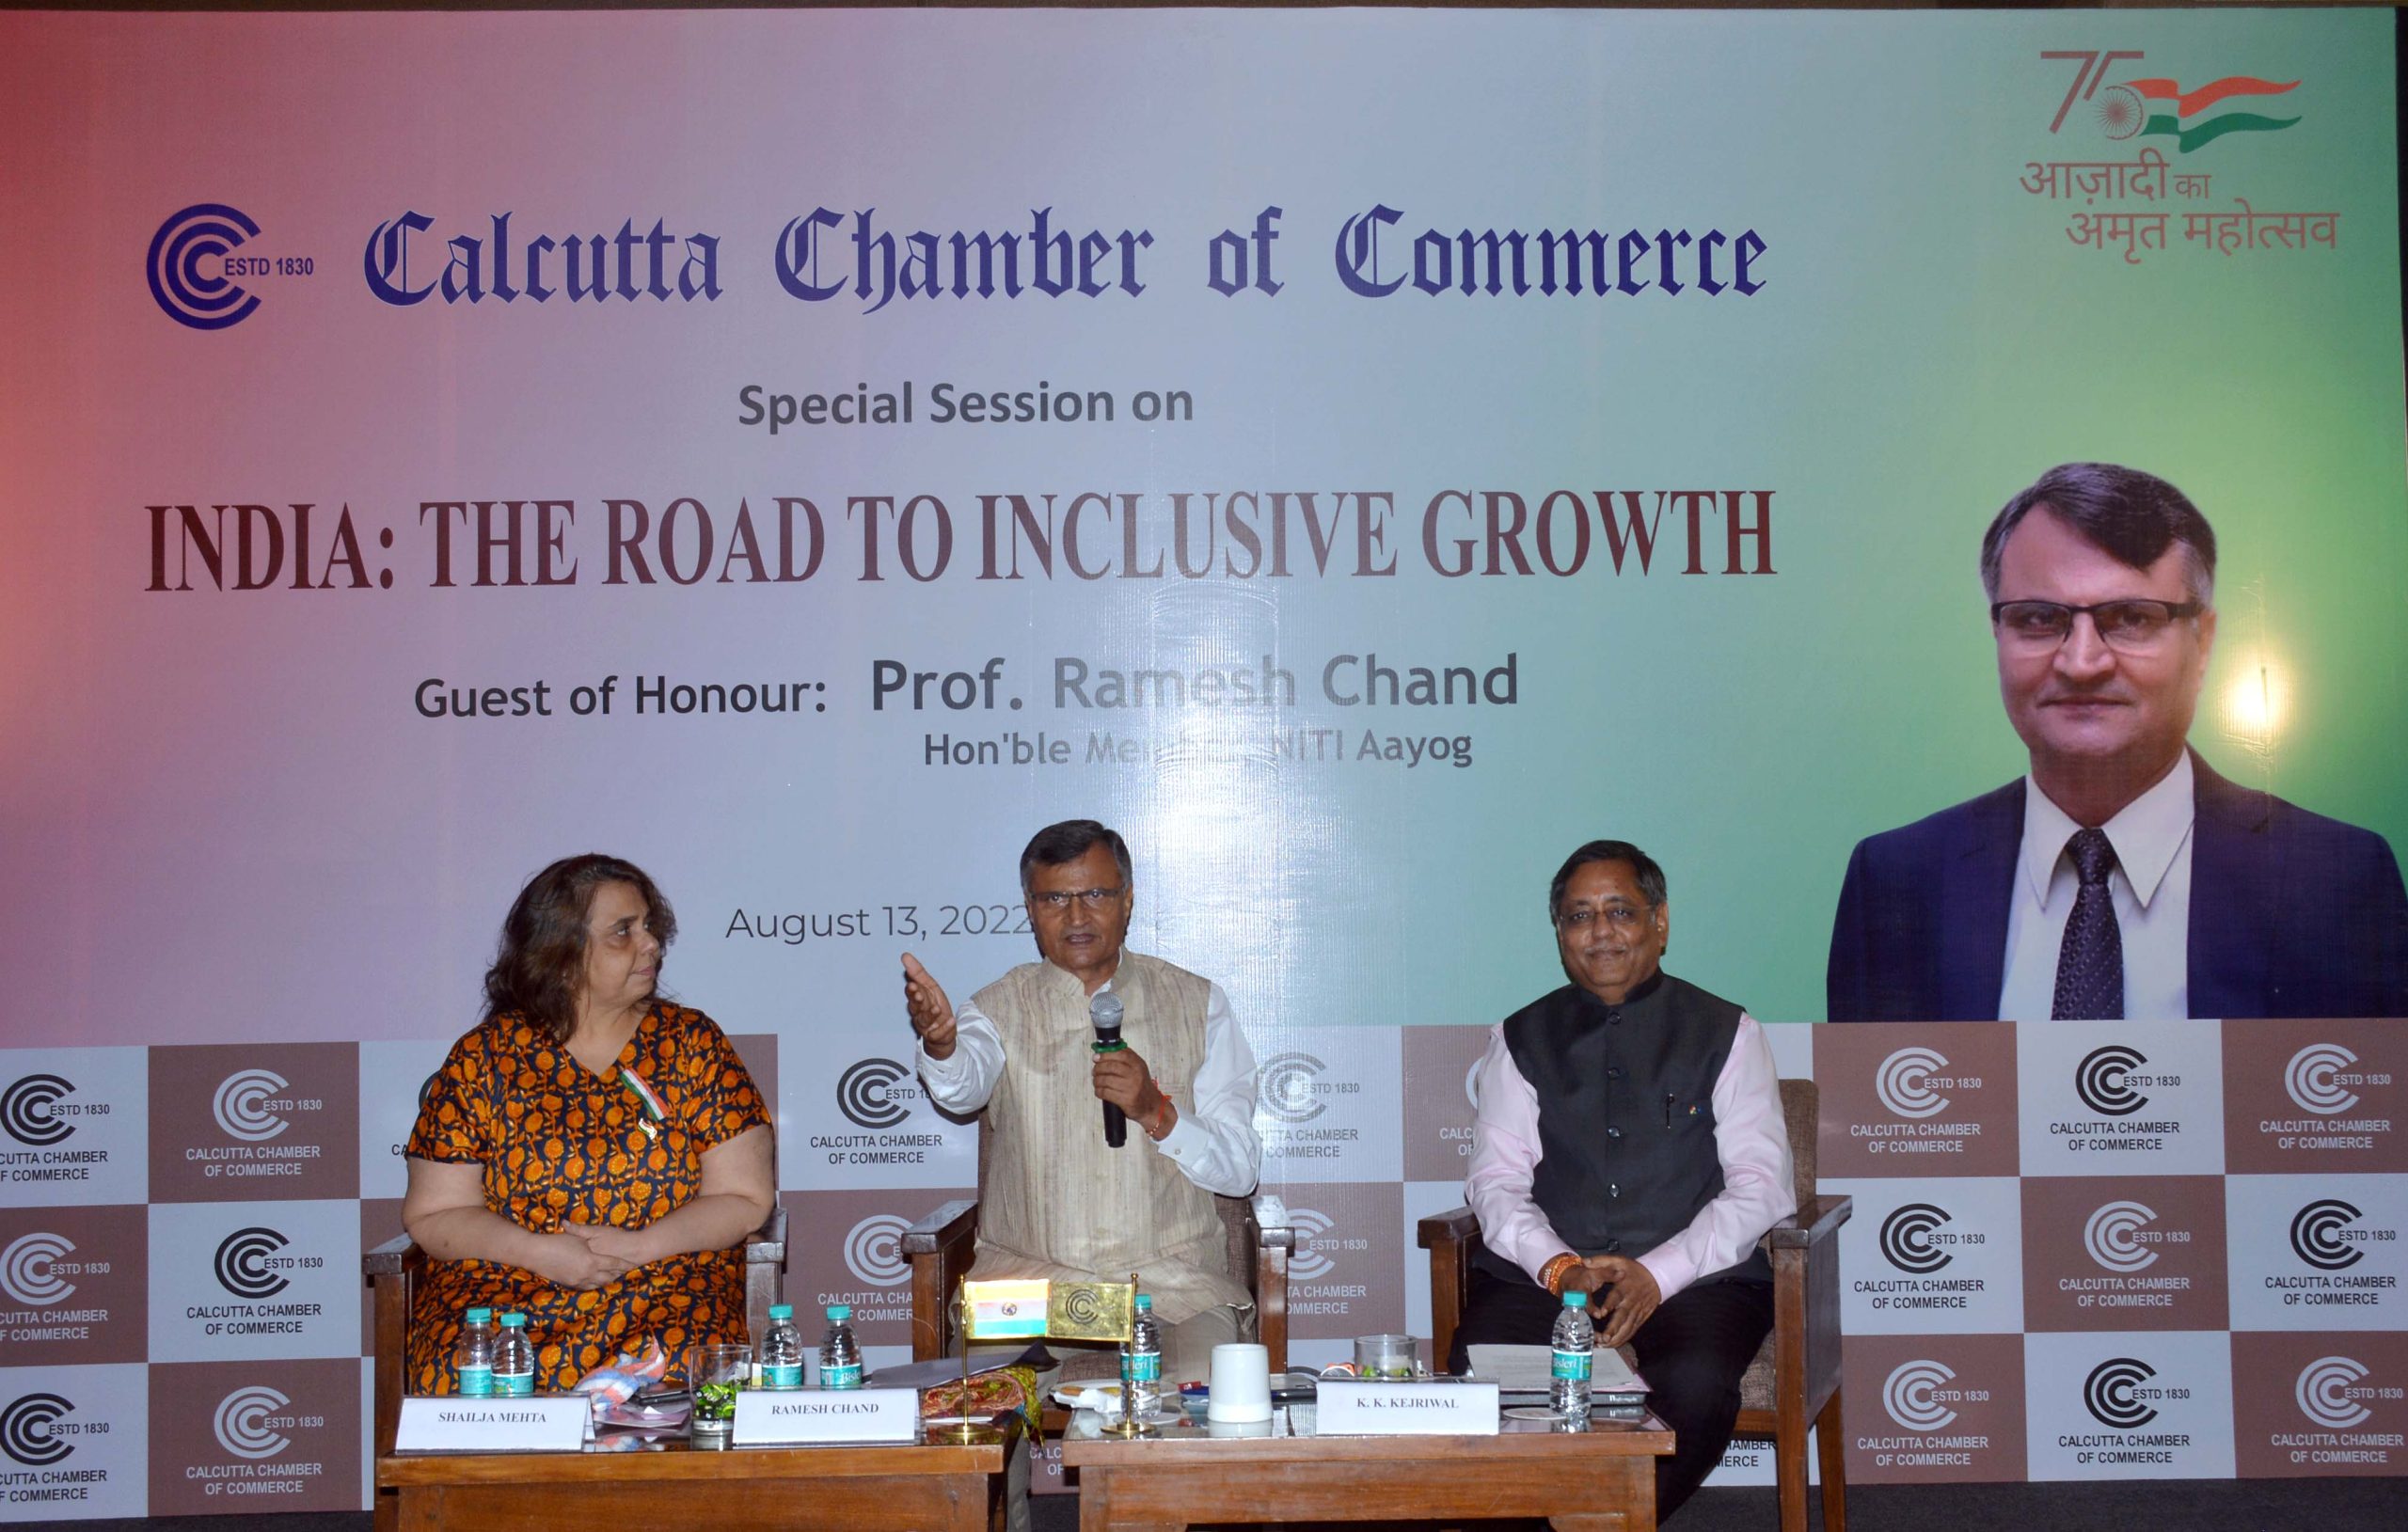 Calcutta Chamber of Commerce meet with Prof. Ramesh Chand is currently Member of NITI Aayog